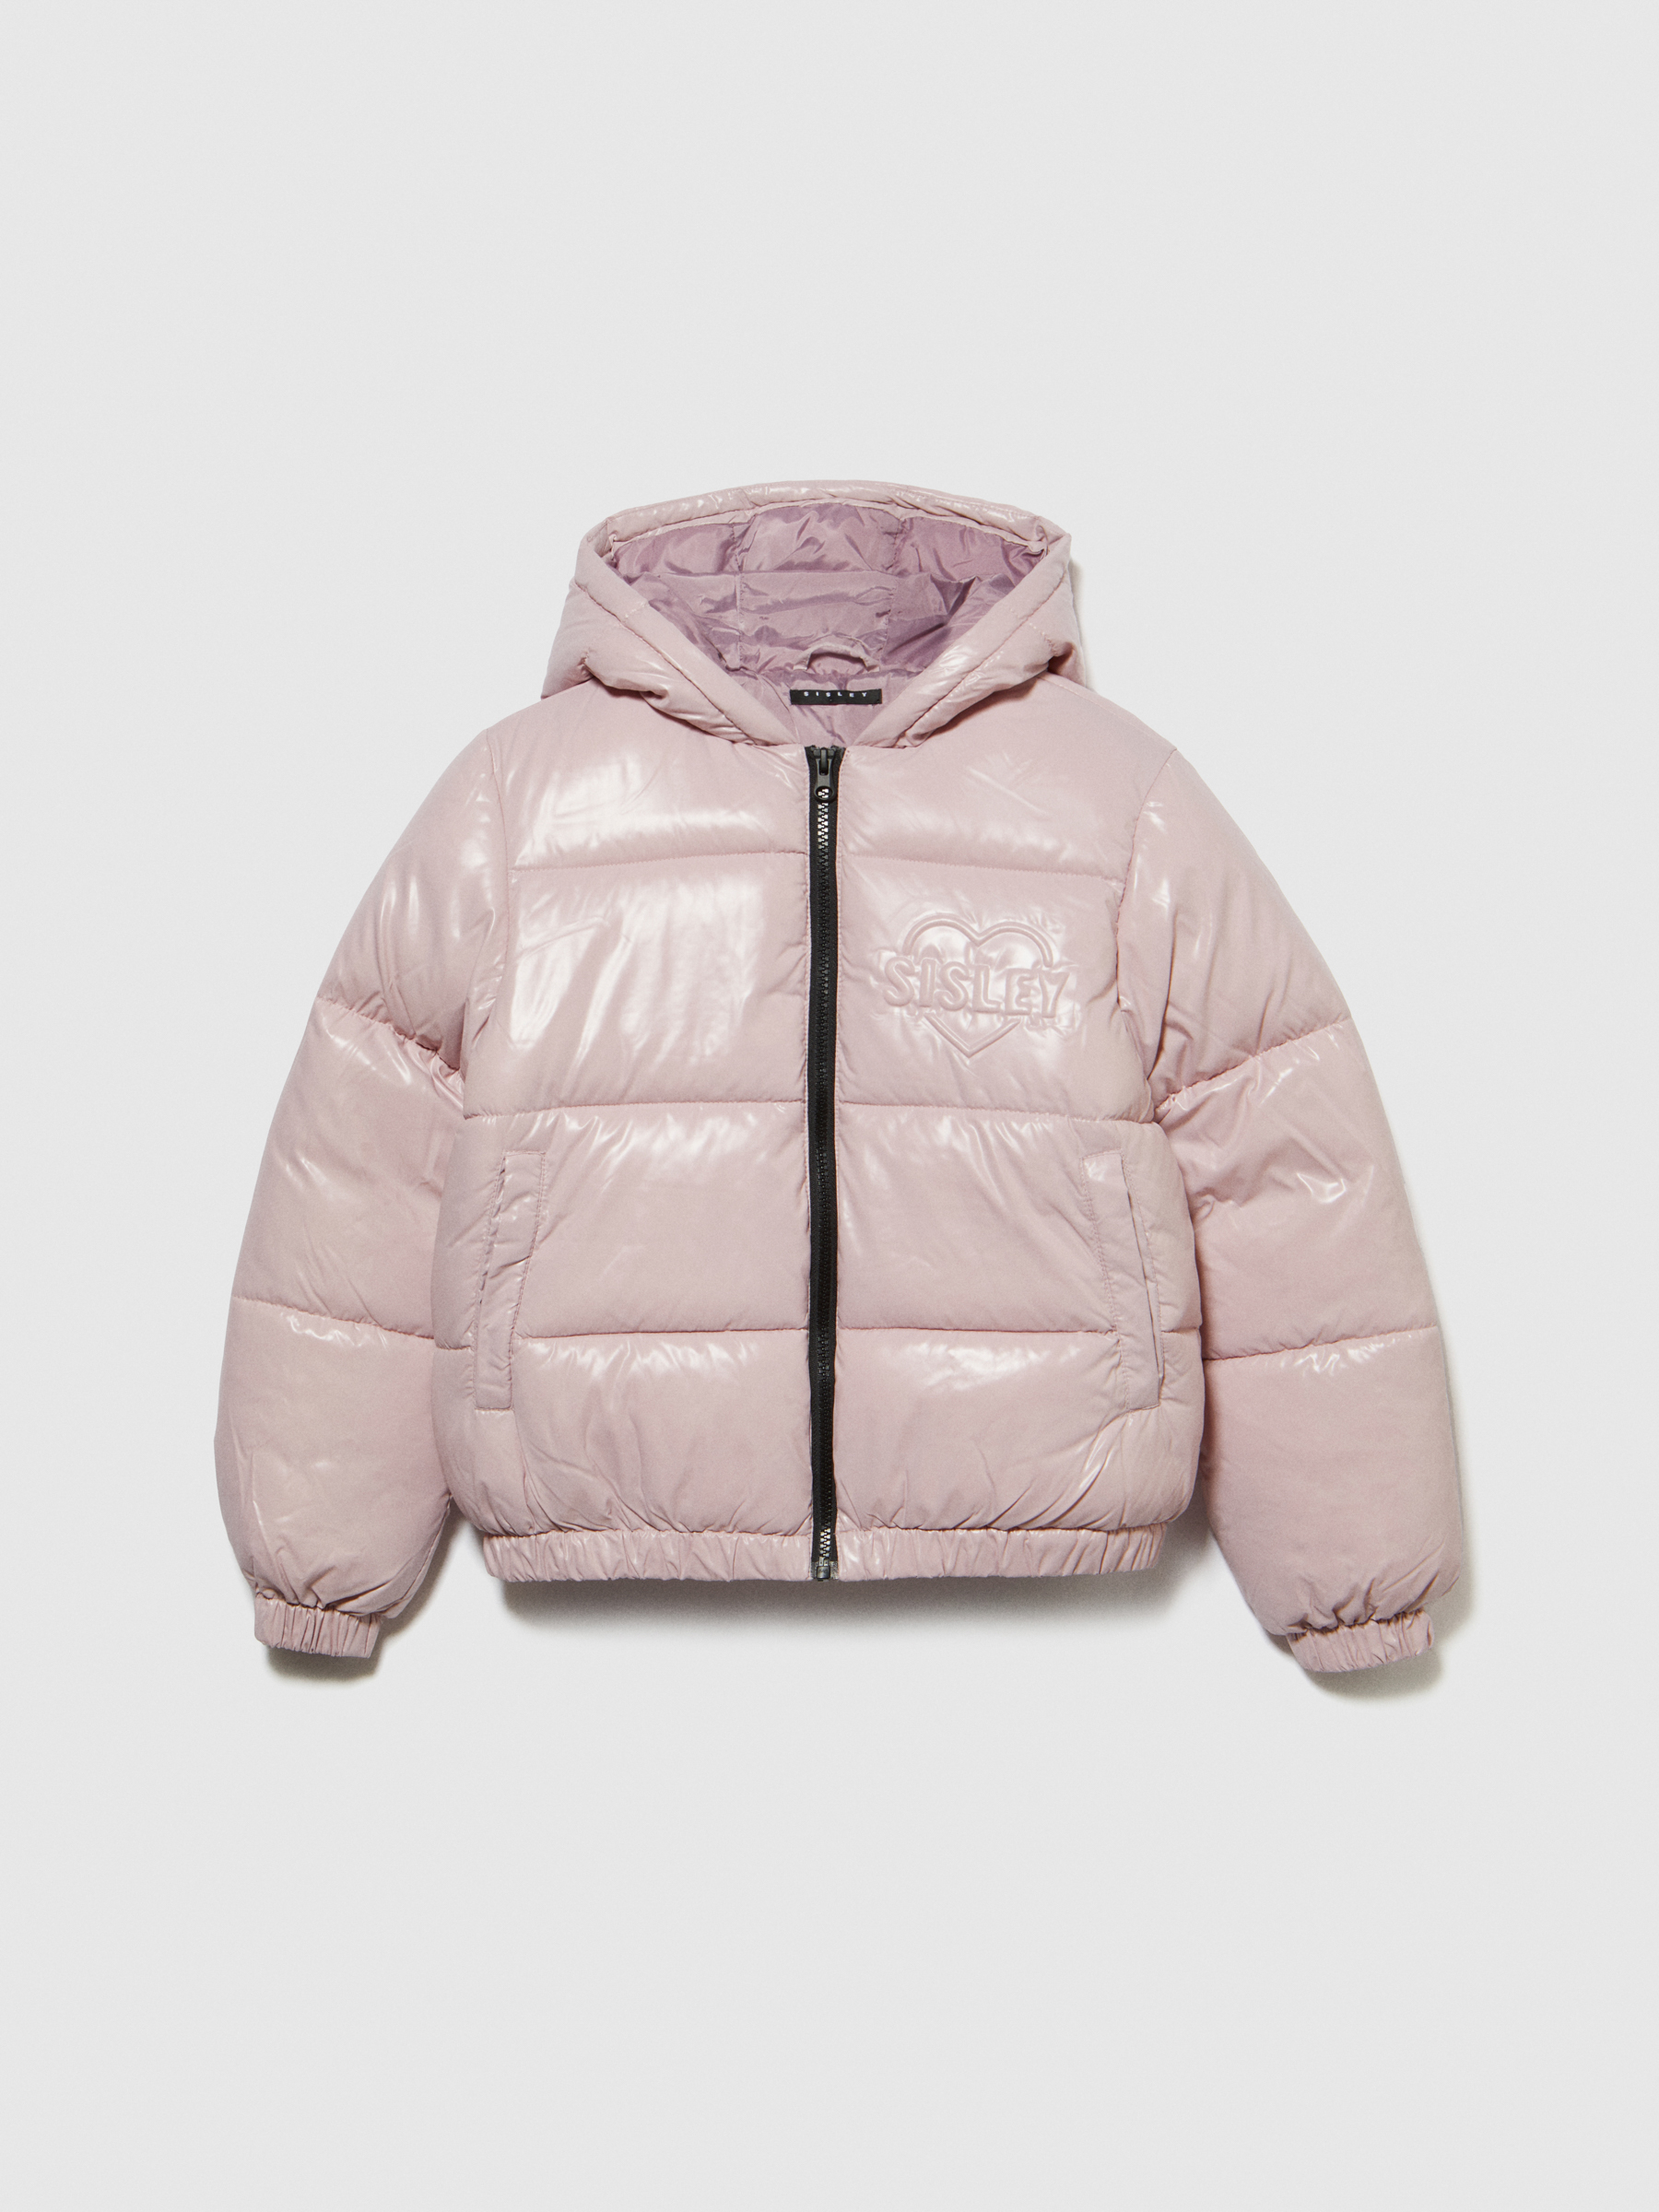 Sisley Young - Padded Jacket With Embossed Print, Woman, Pastel Pink, Size: S